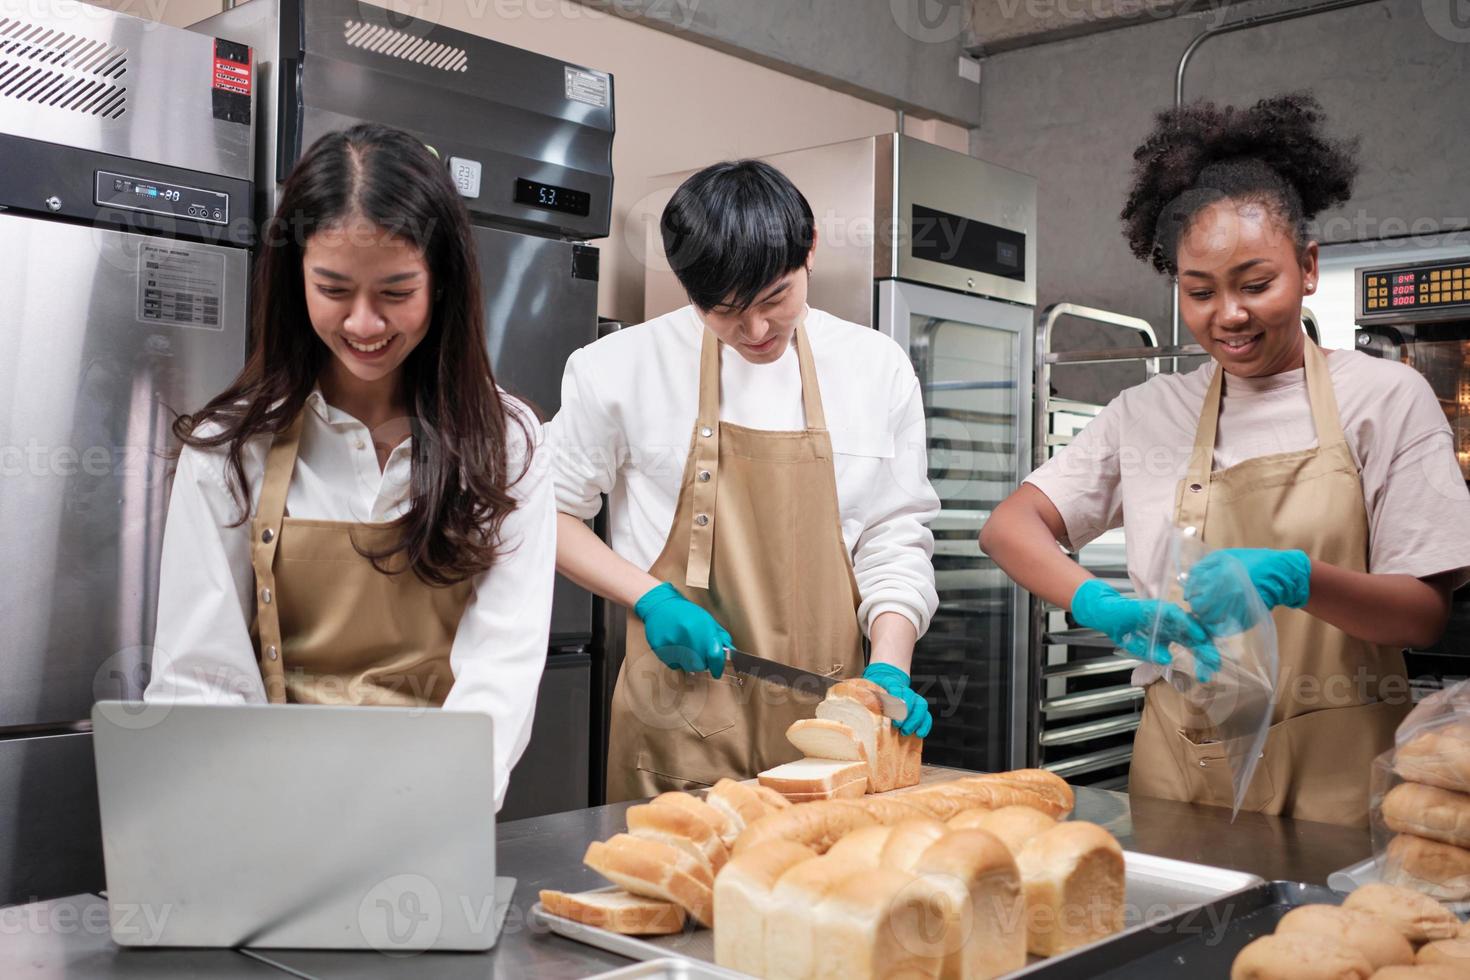 Three young friends and startup partners of bread dough and pastry foods busy with homemade baking jobs while cooking orders online, packing, and delivering on bakery shop, small business entrepreneur photo